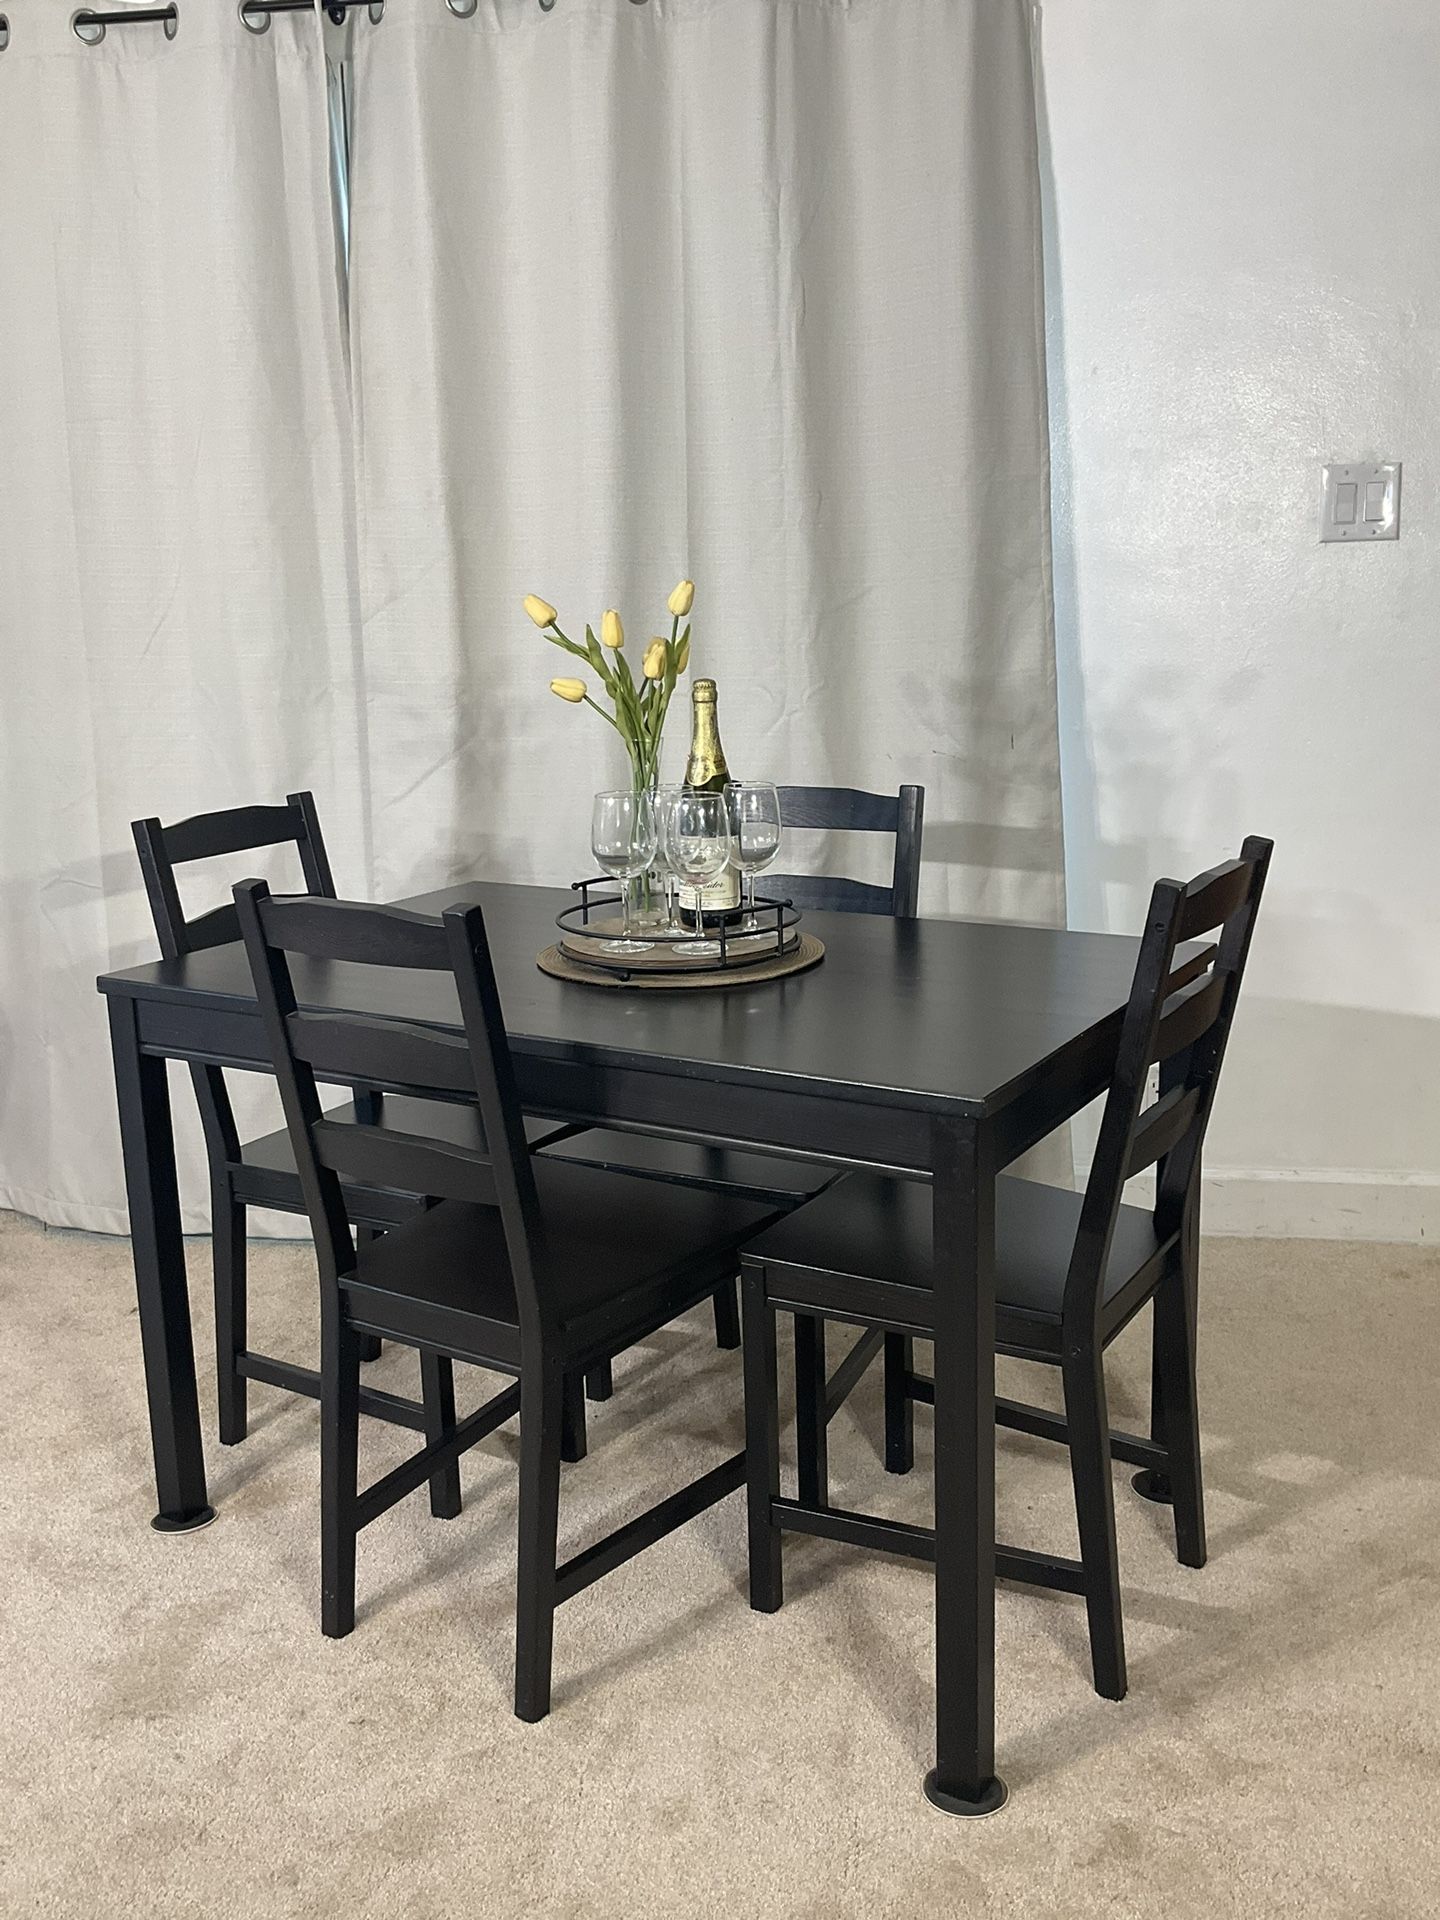 Black Ikea Jokkmokk Dining Table & 4 Chairs PERFECT FOR SMALL PLACE!